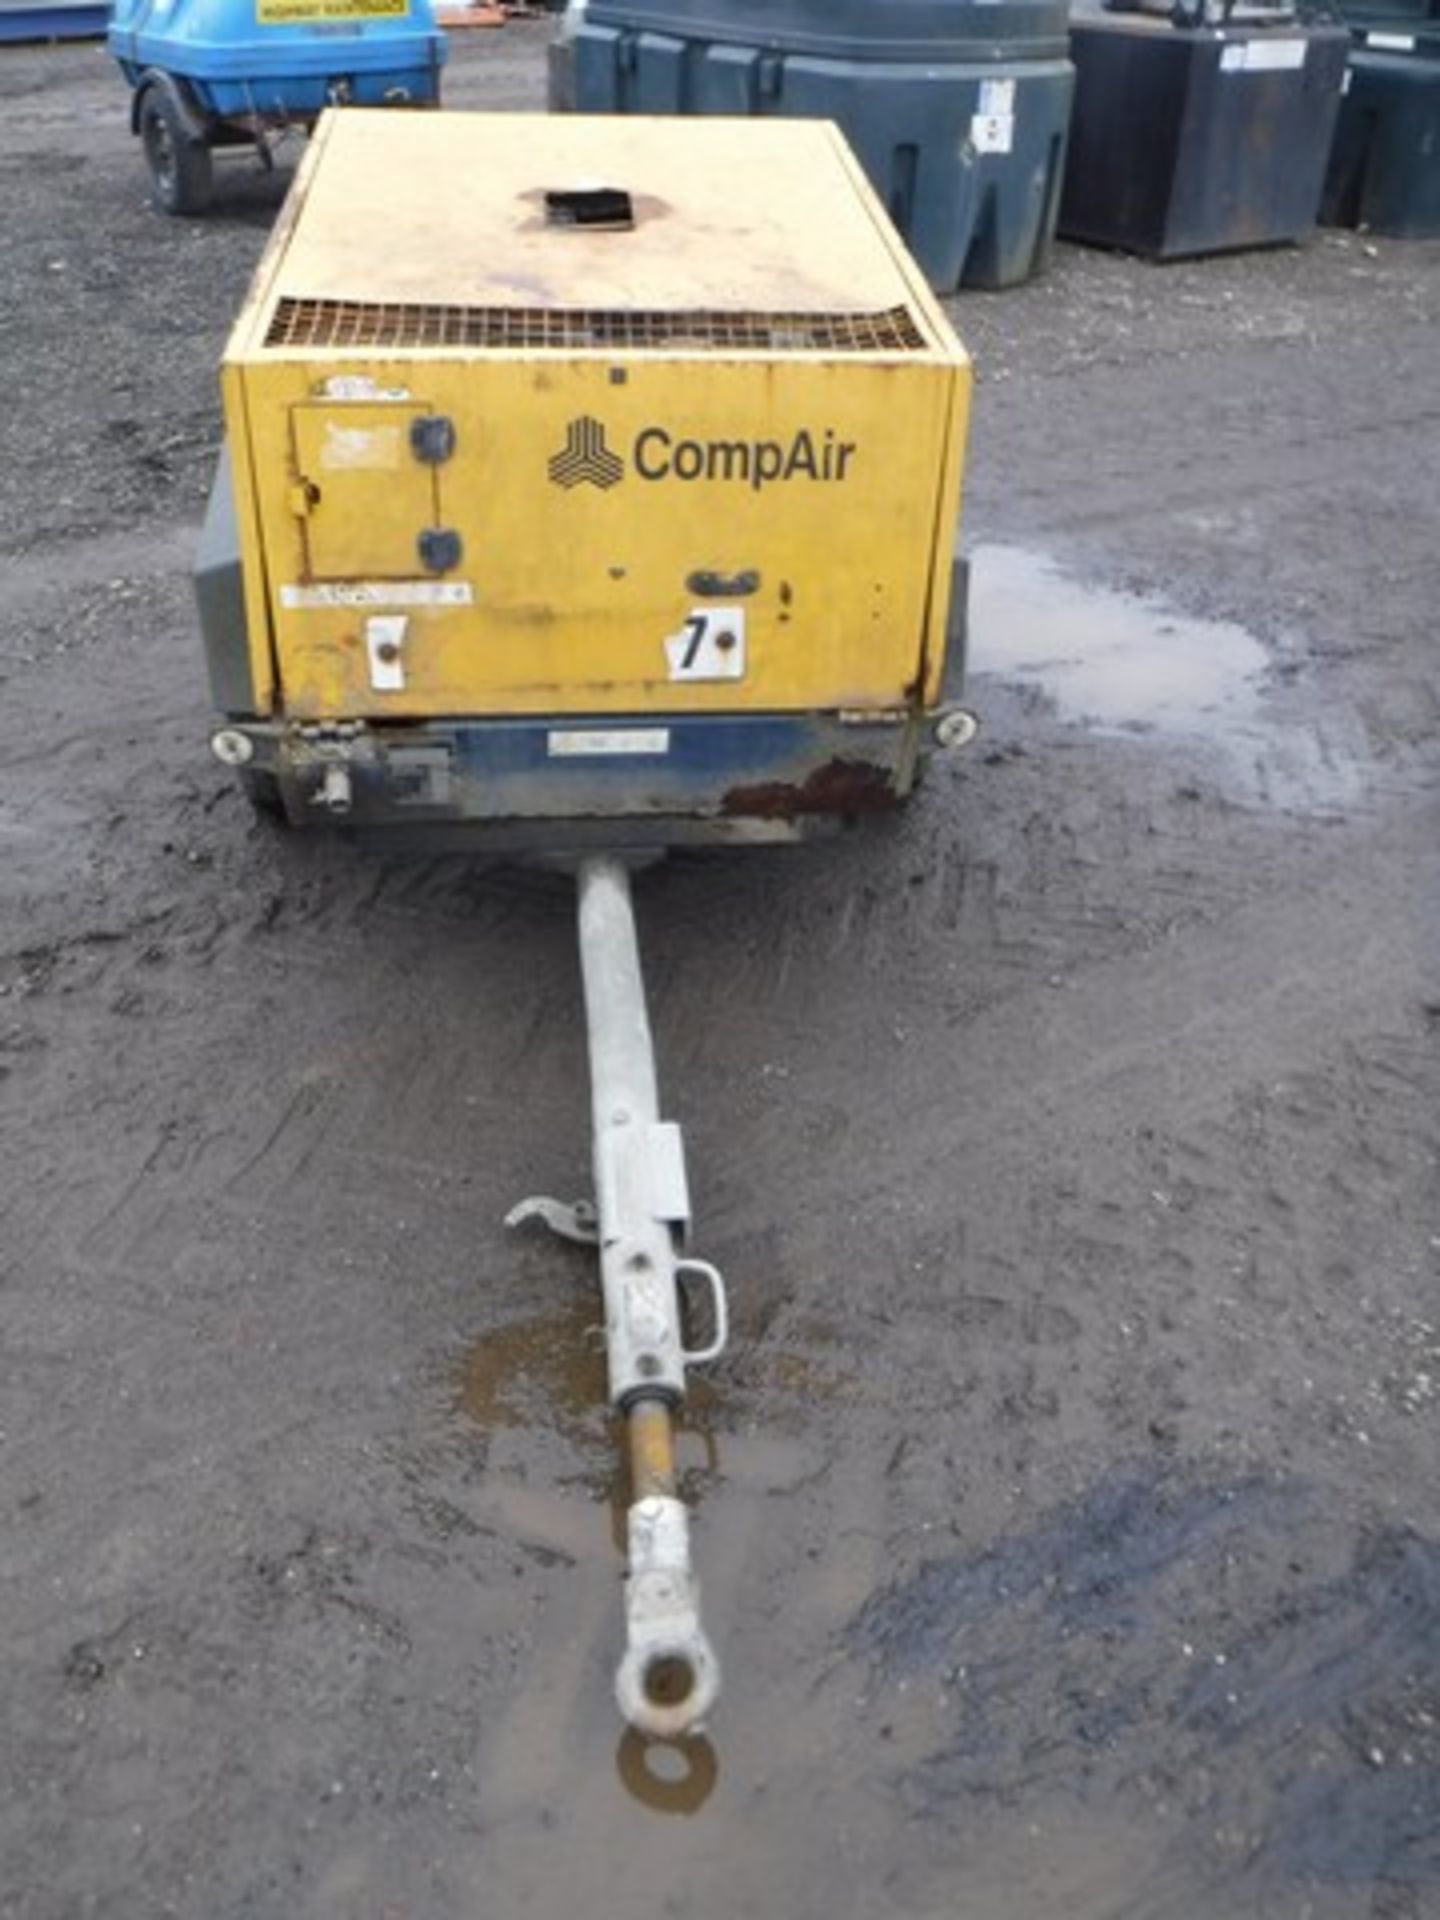 2006 COMPAIR C20M2111 TOWABLE COMPRESSOR, S/N 761530008, 1084HRS (NOT VERIFIED) - Image 3 of 8